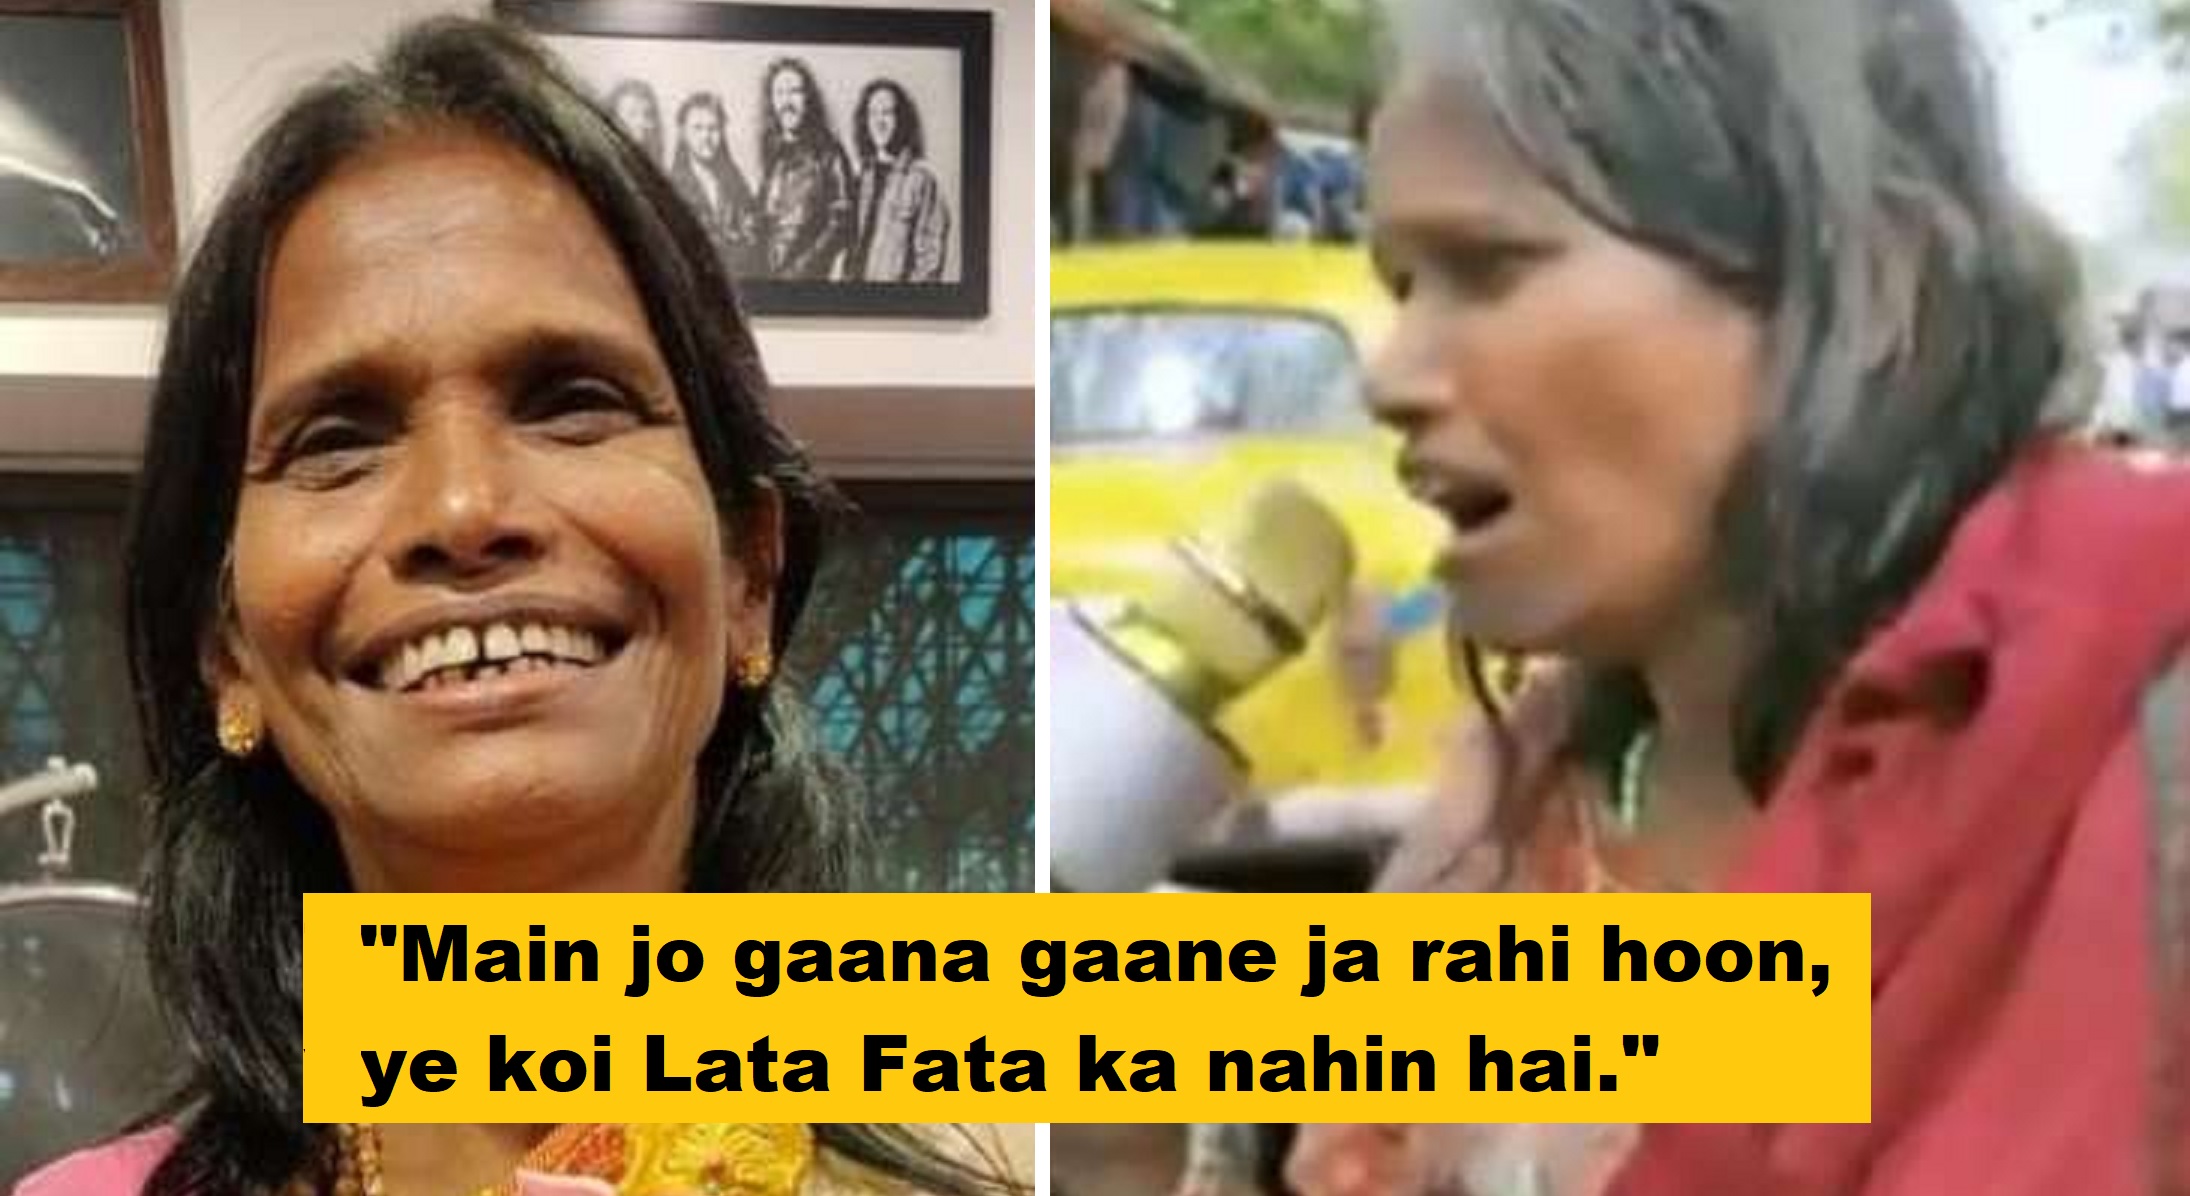 Ranu Mondal Insults Lata Mangeshkar In New Video While Singing A Song [Watch]